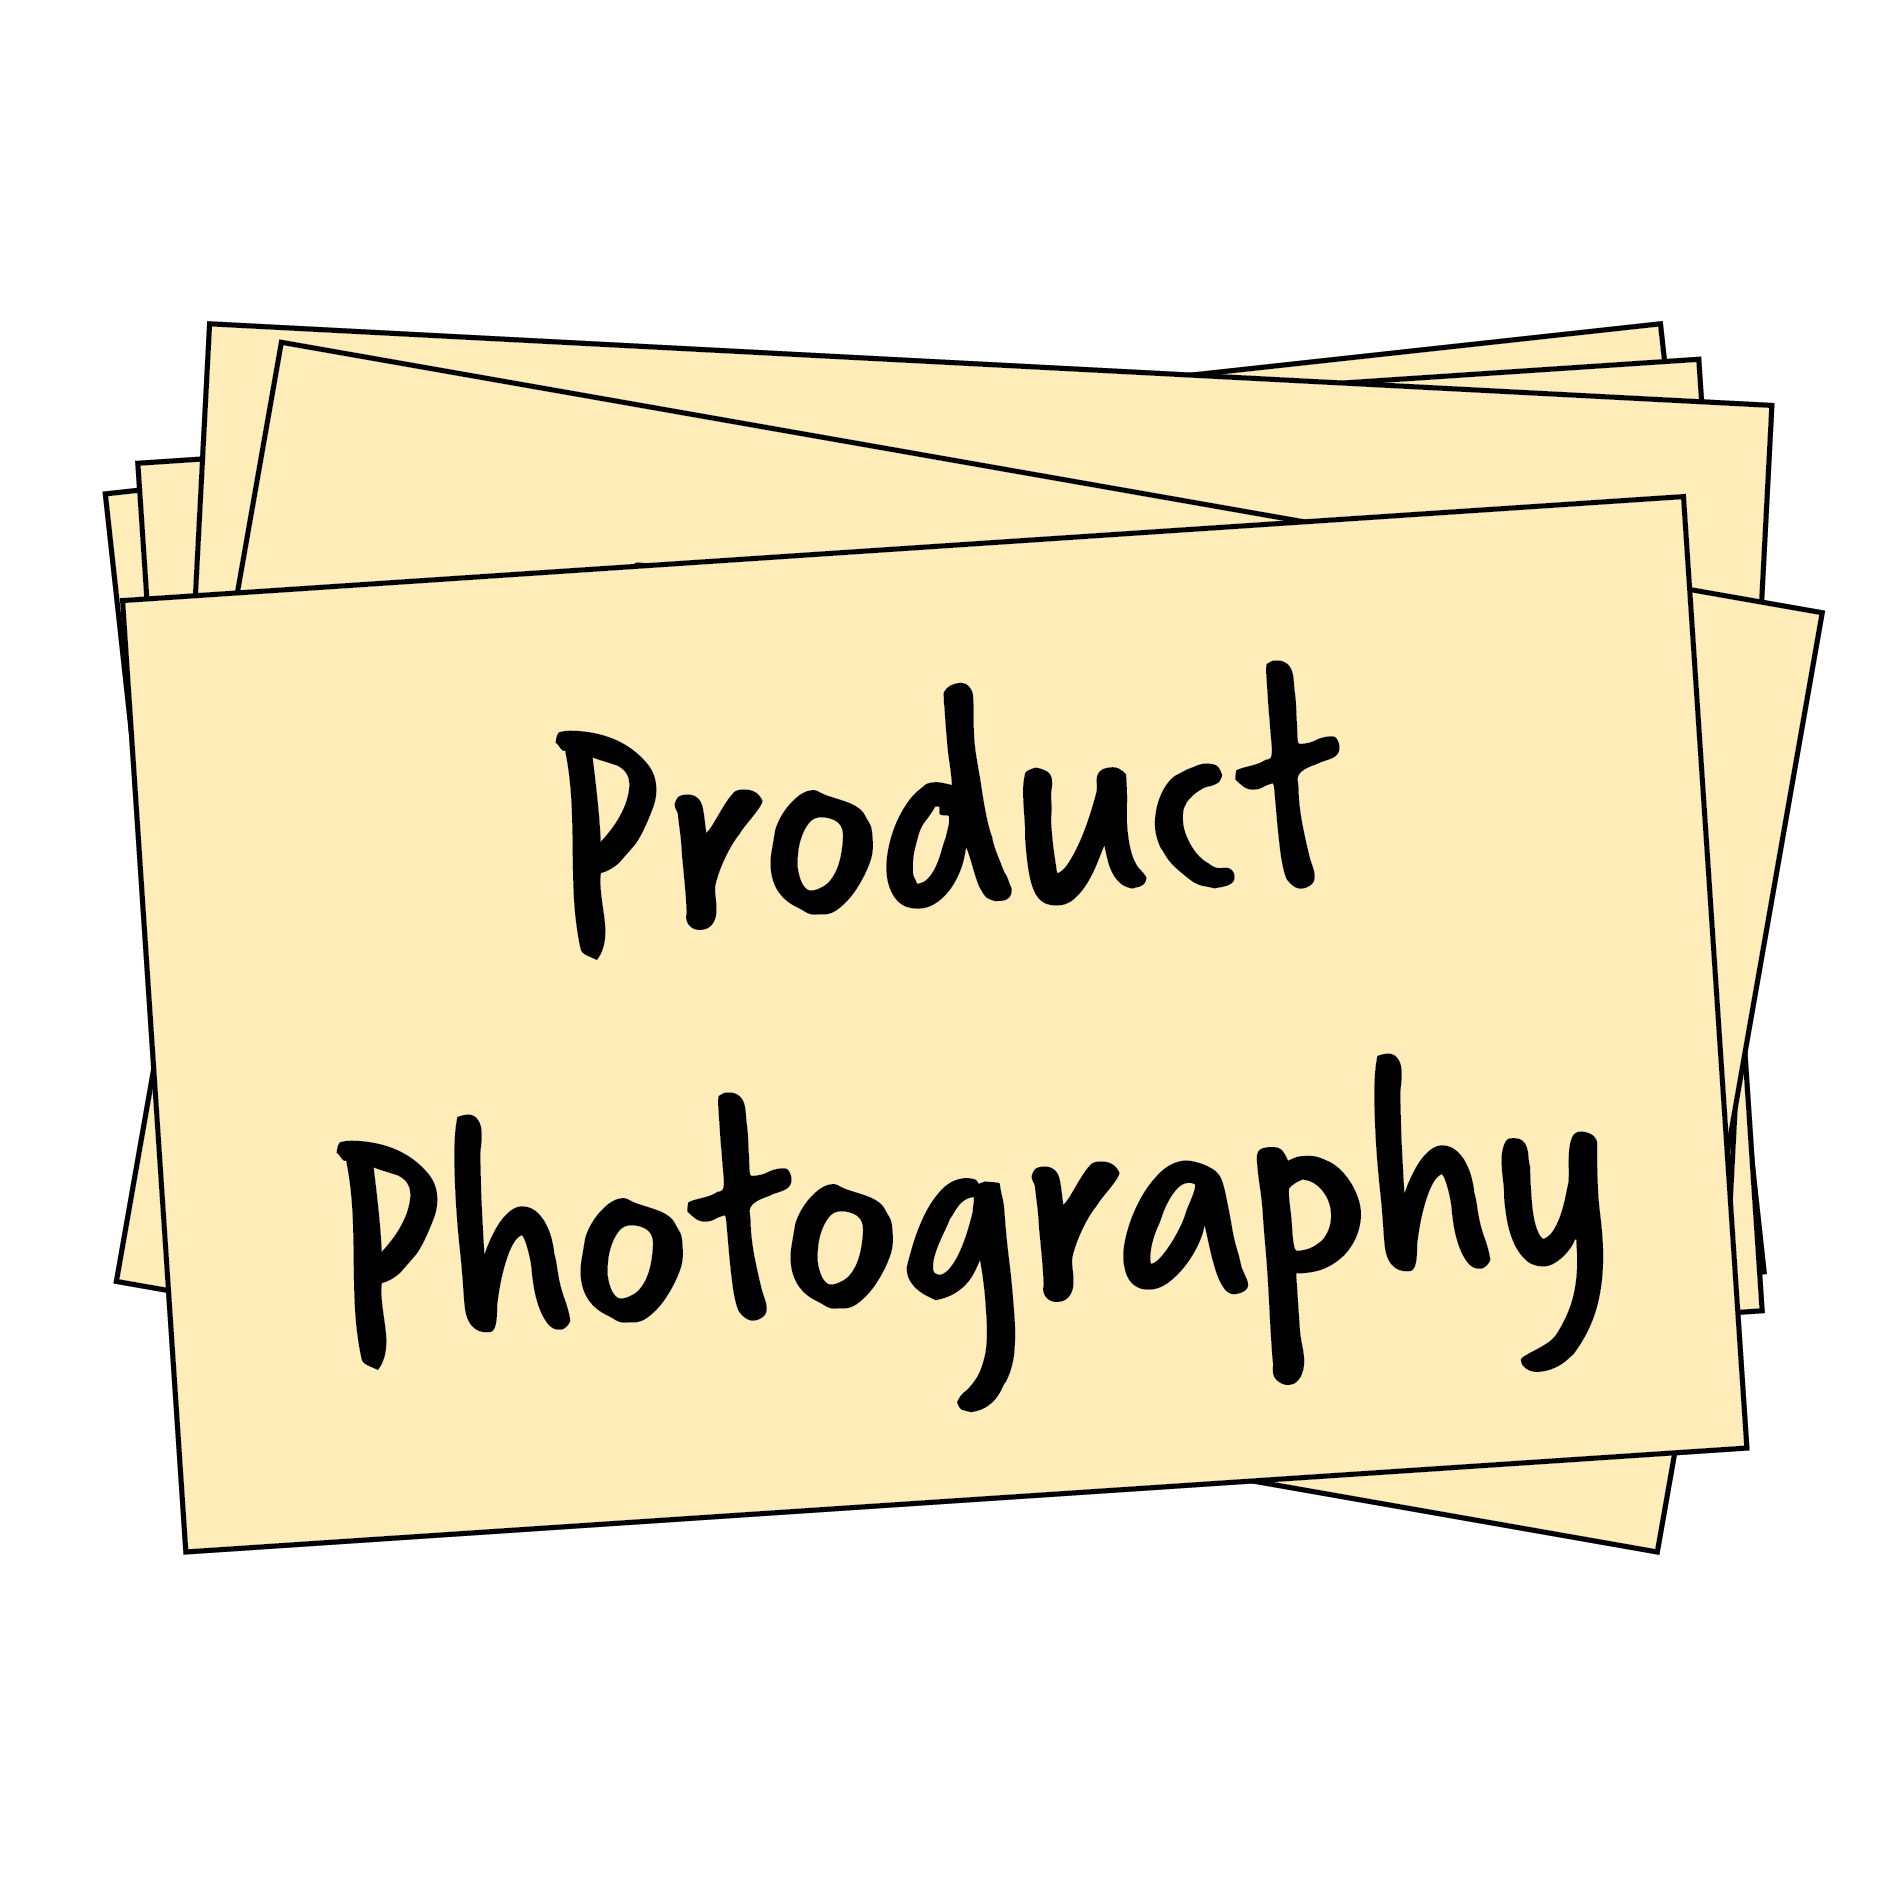 A sign rests at an angle on top of other cards, reading Product Photography.